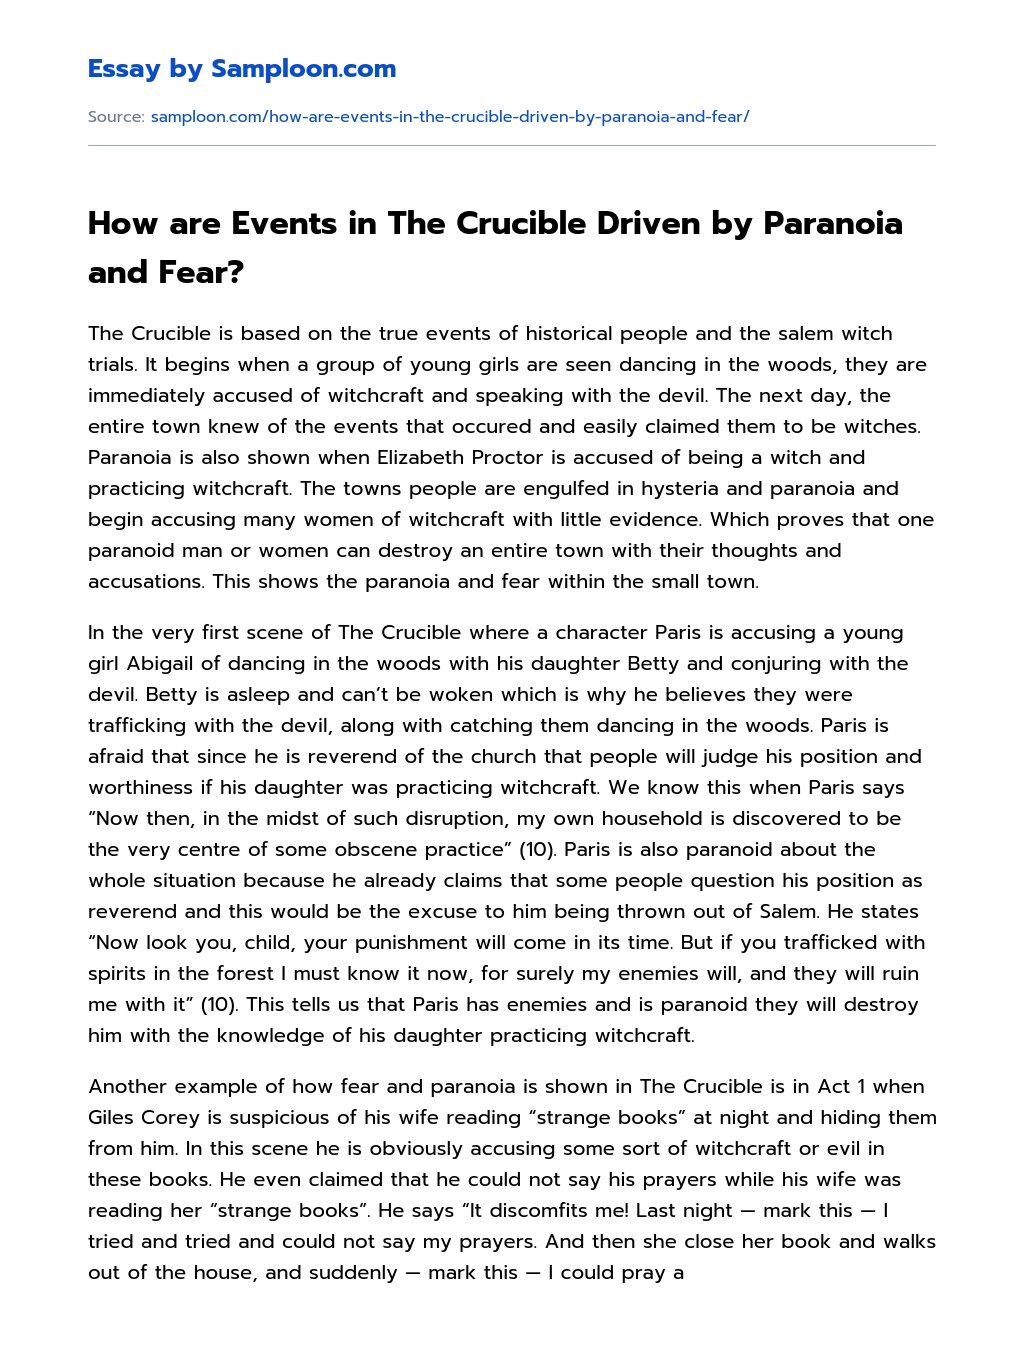 How are Events in The Crucible Driven by Paranoia and Fear? essay